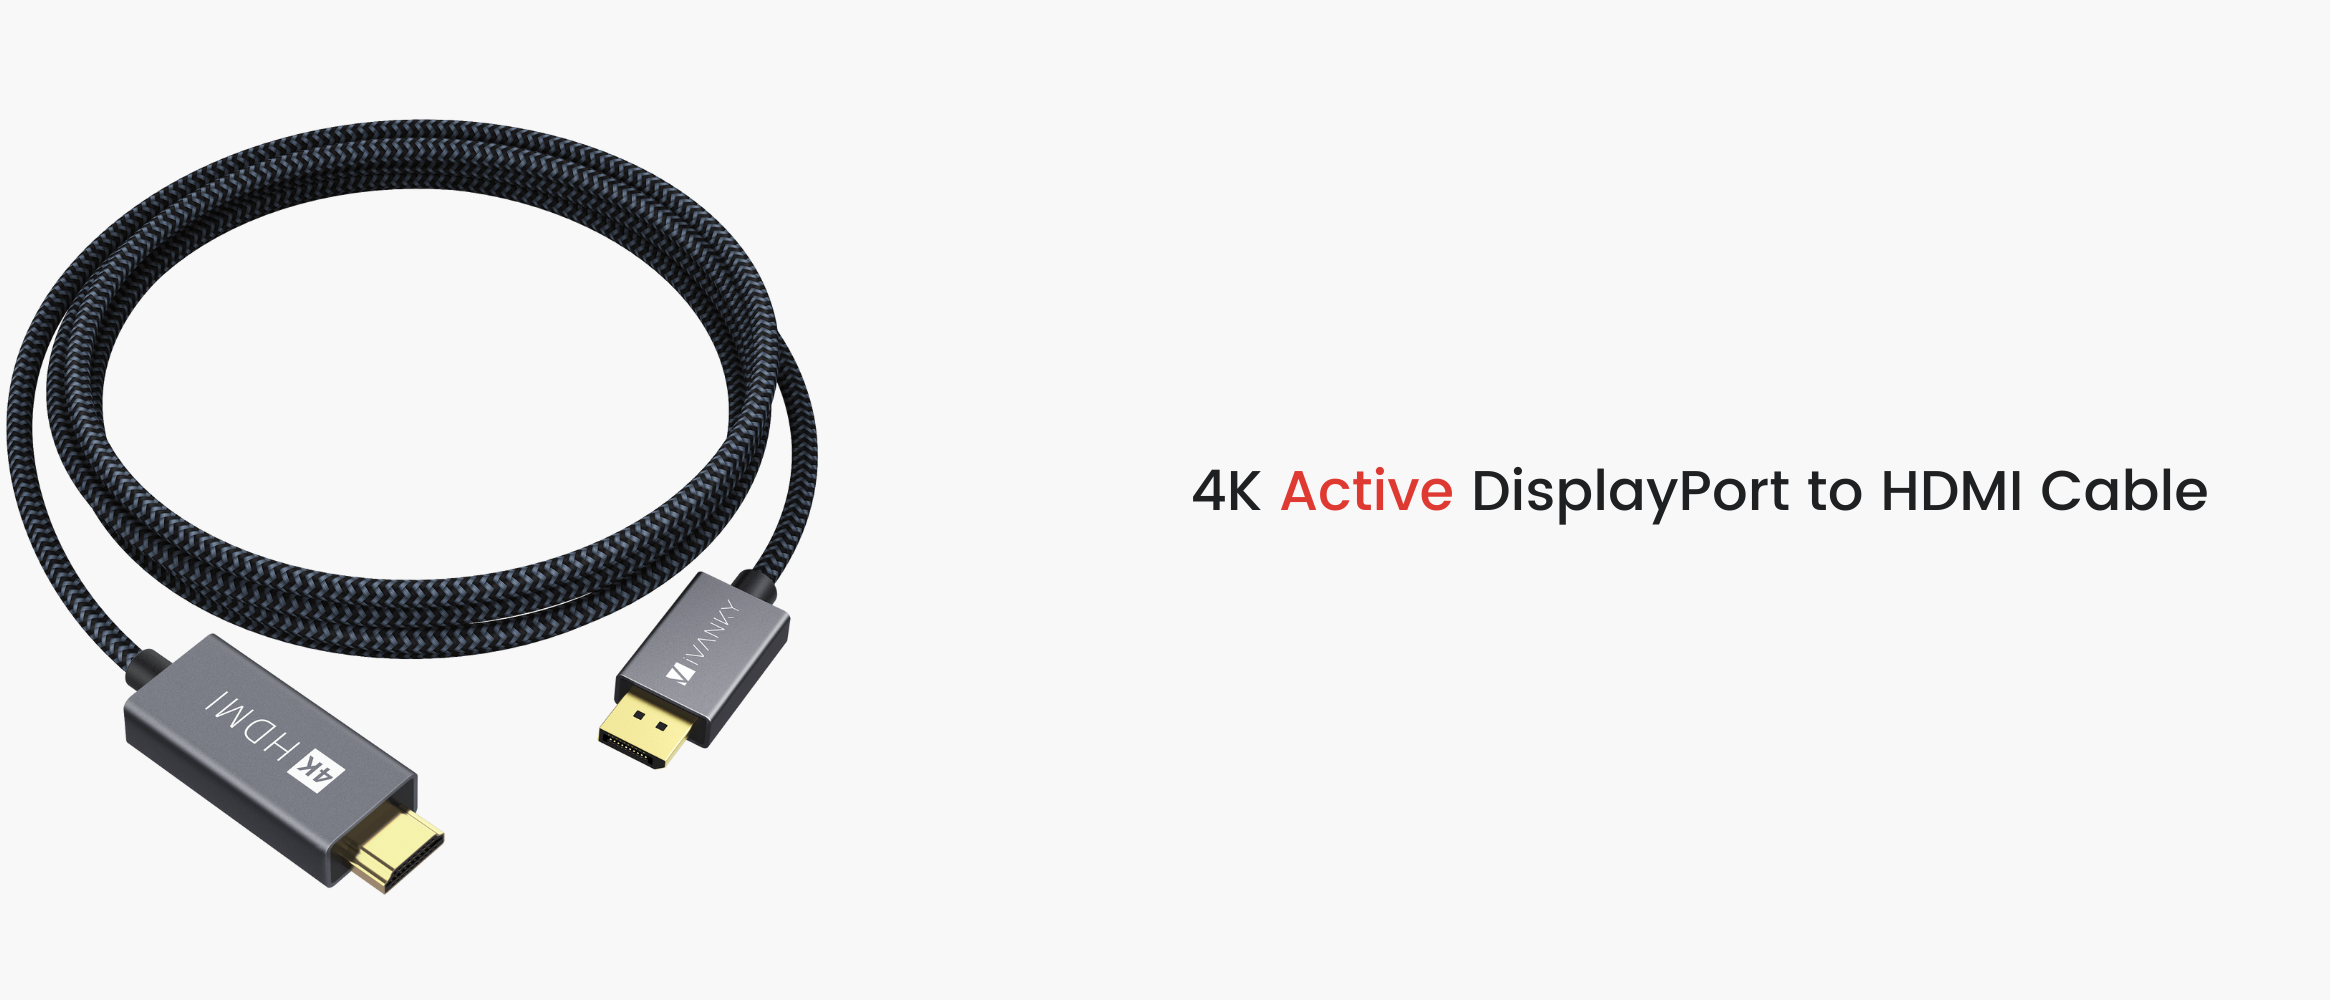 4K Active DisplayPort to HDMI Cable